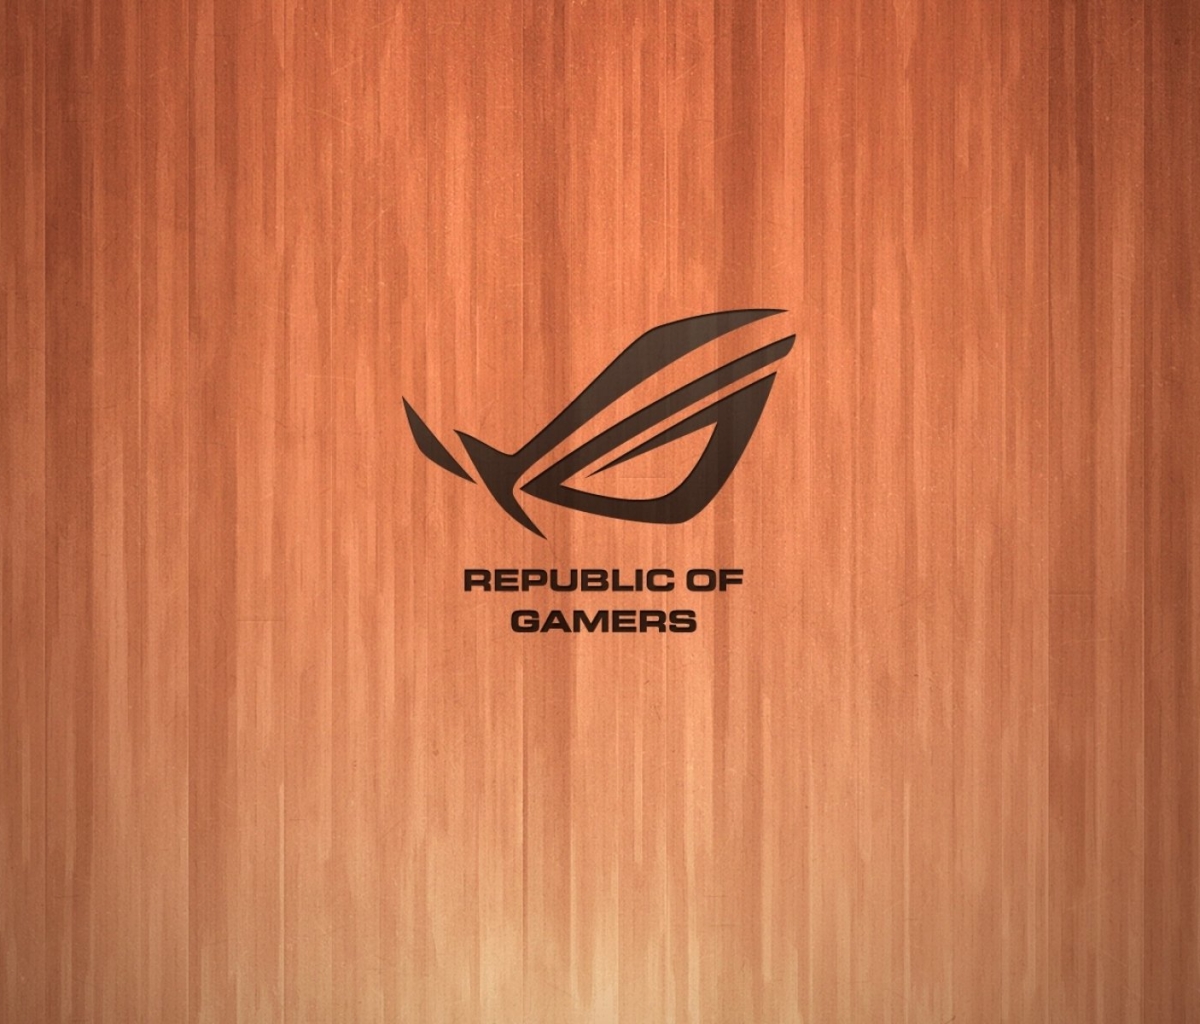 Download mobile wallpaper Technology, Computer, Asus Rog, Asus for free.